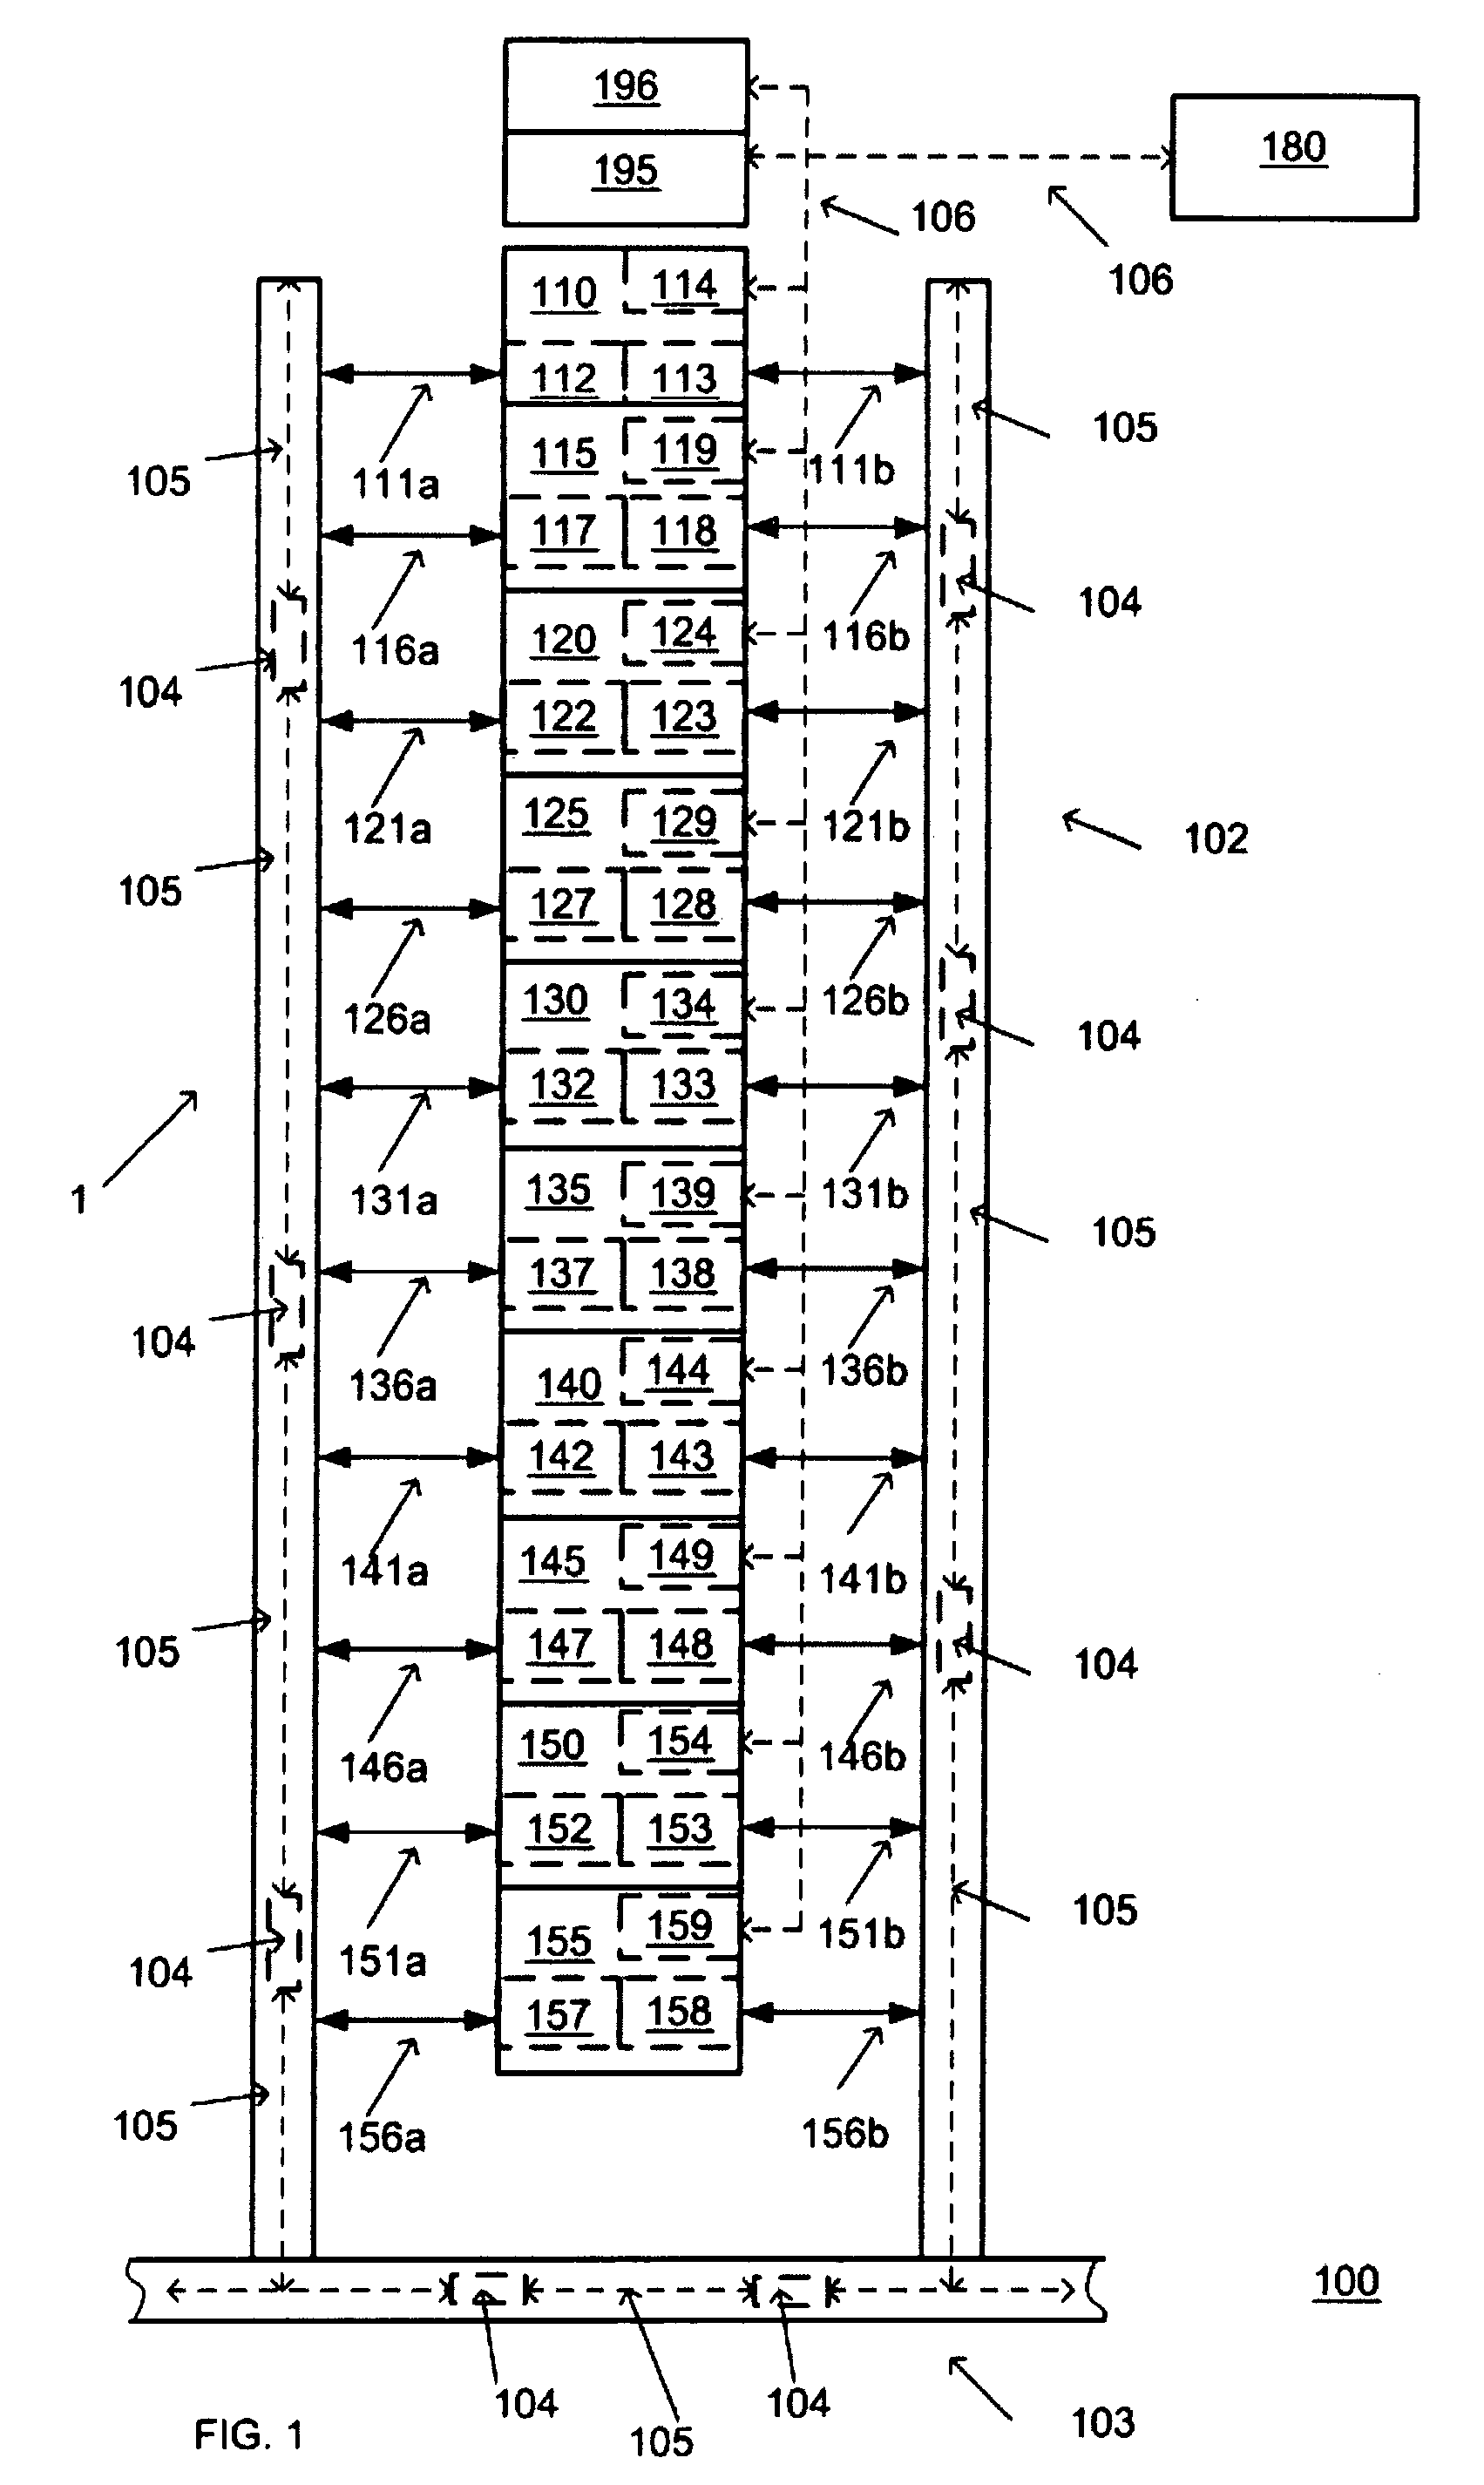 Method and apparatus for verifying a site-dependent wafer